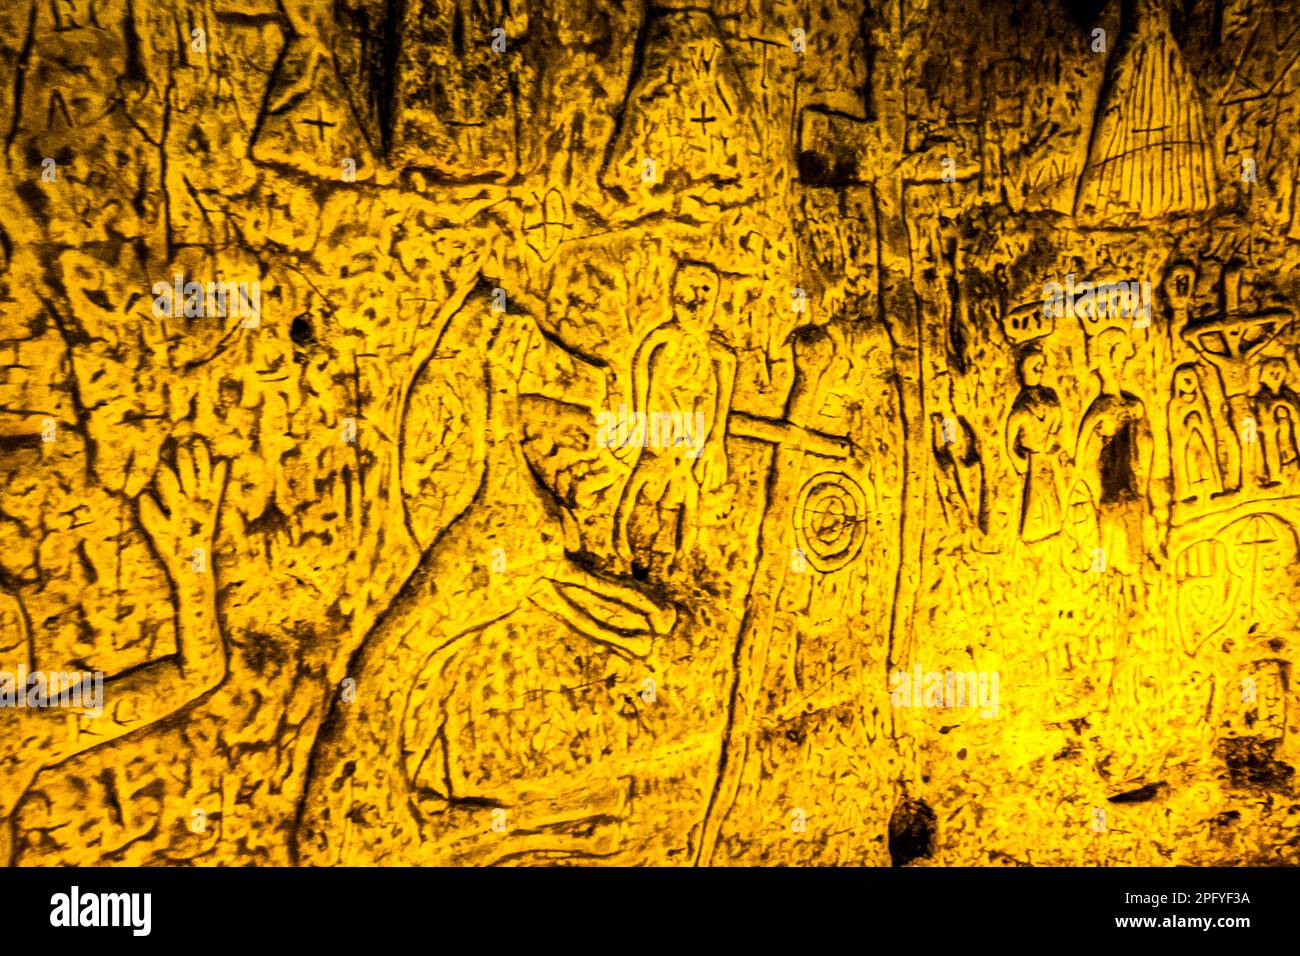 Royston Cave in Herfordshire U.K. still puzzles historians today. The cave is decorated with a large number of low-relief wall sculptures. They are mainly Christian motifs in the medieval style. At the top left is depicted a crucifixion scene. Royston Cave in Katherine's Yard, Melbourn Street, Royston, England Stock Photo